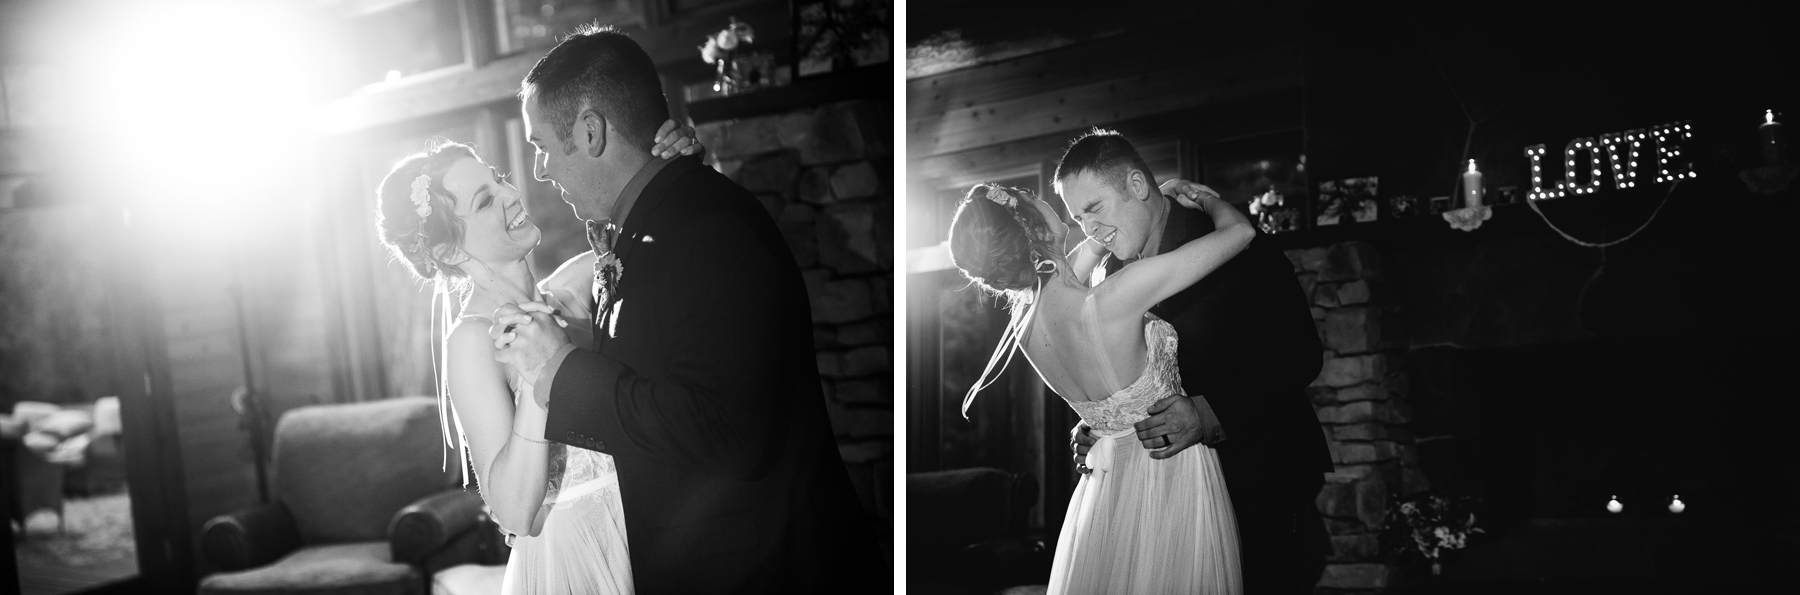 lake dale resort bride and groom first dance